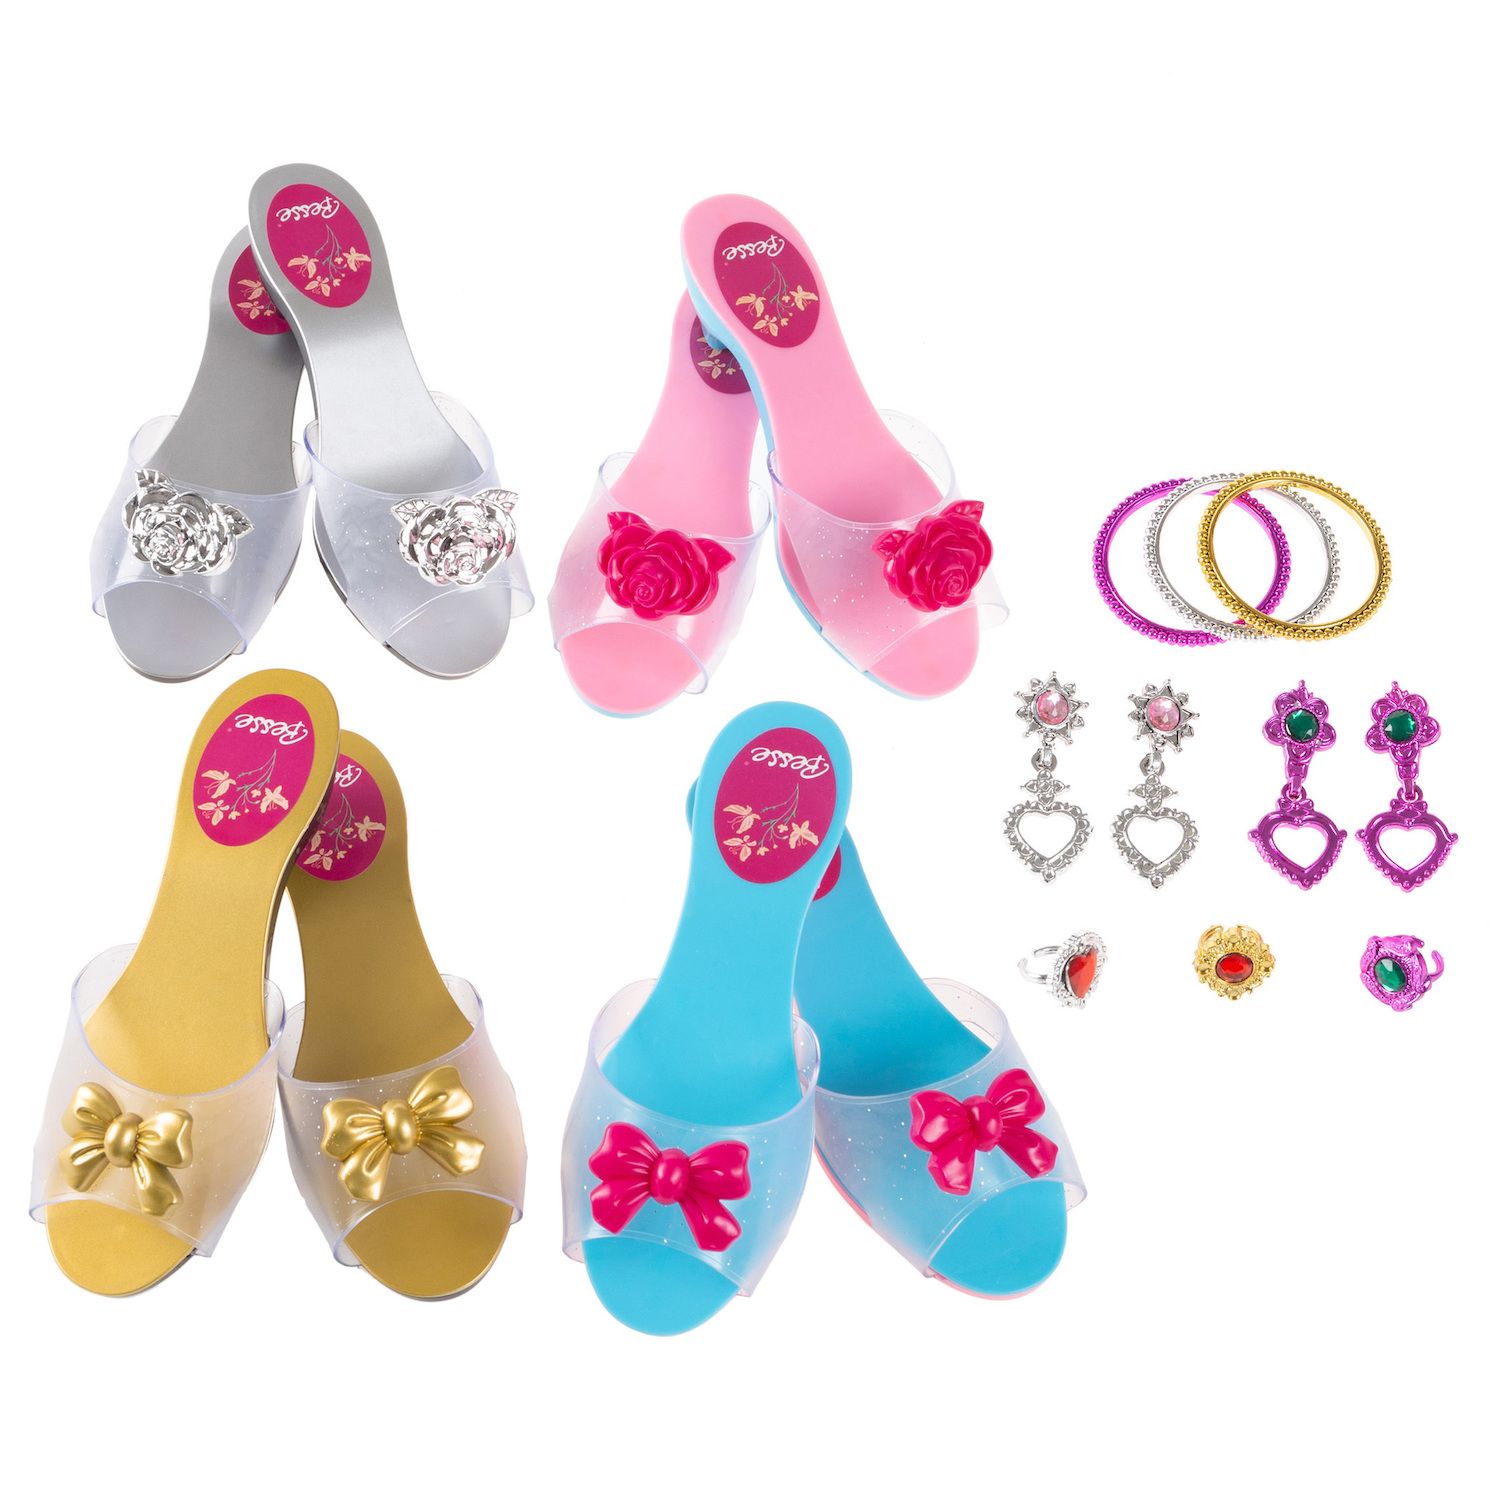 Image for Hey! Play! Princess Dress Up Set- High Heels, Bracelets, Earrings and Rings at Kohl's.